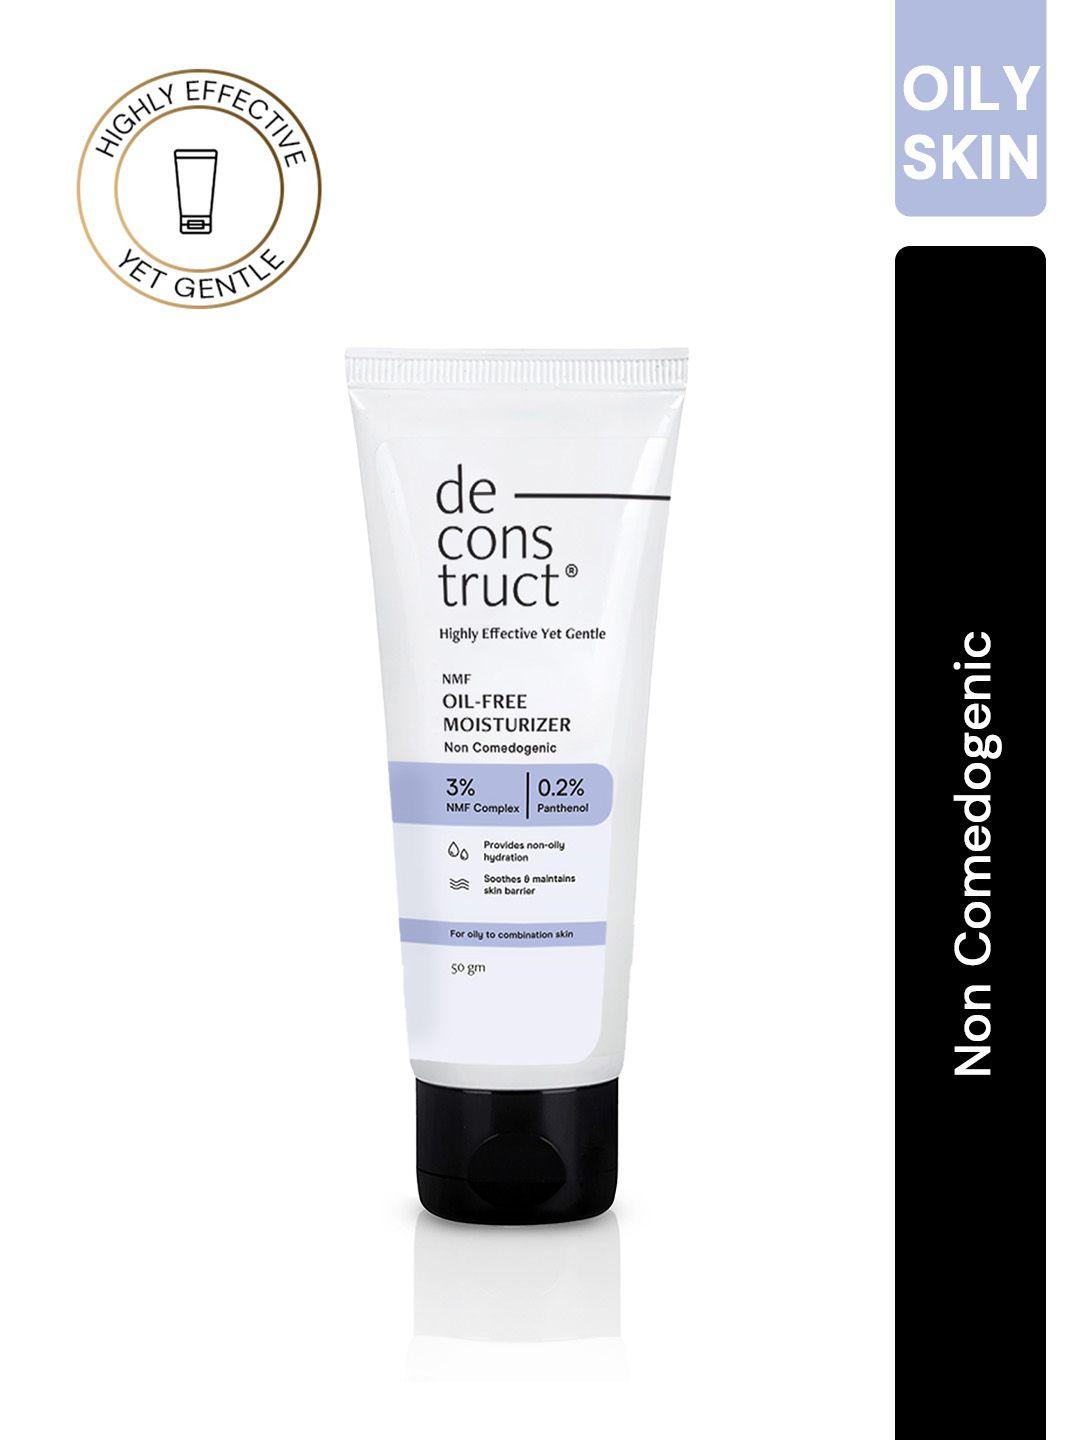 deconstruct oil-free moisturizer for oily skin with 3% nmf complex & 0.2% panthenol - 50g